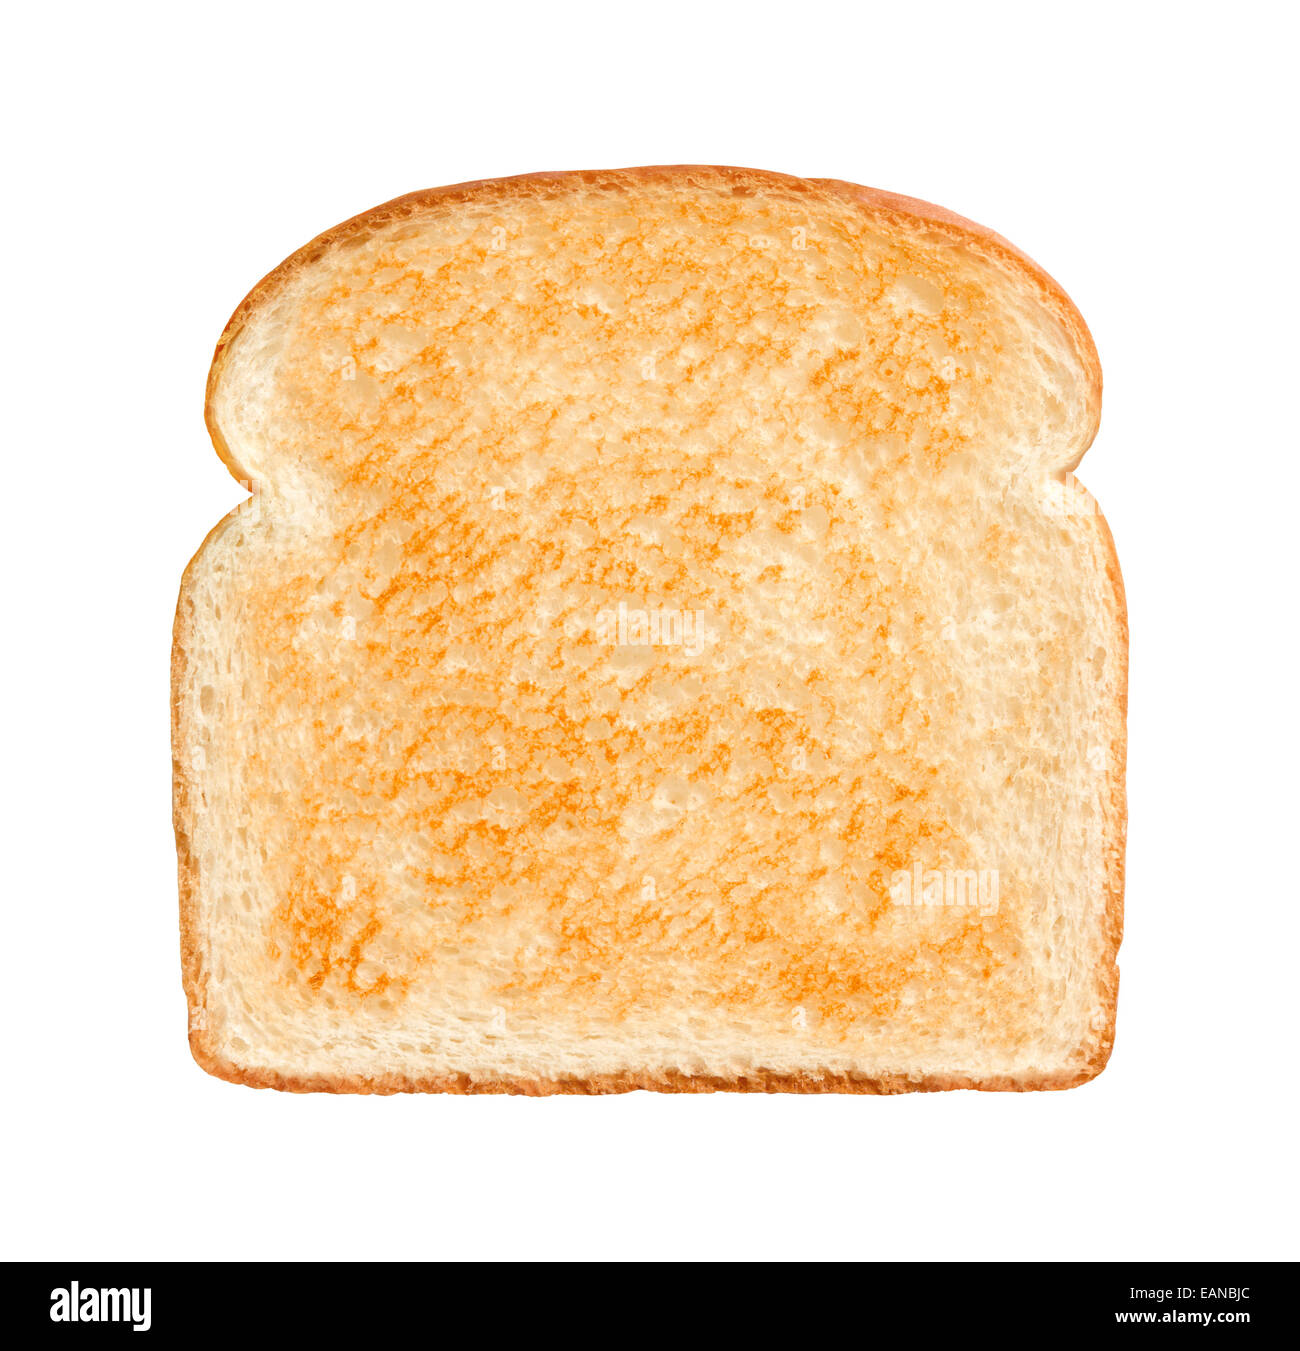 Single Slice of lightly toasted white bread isolated on a white background. Stock Photo